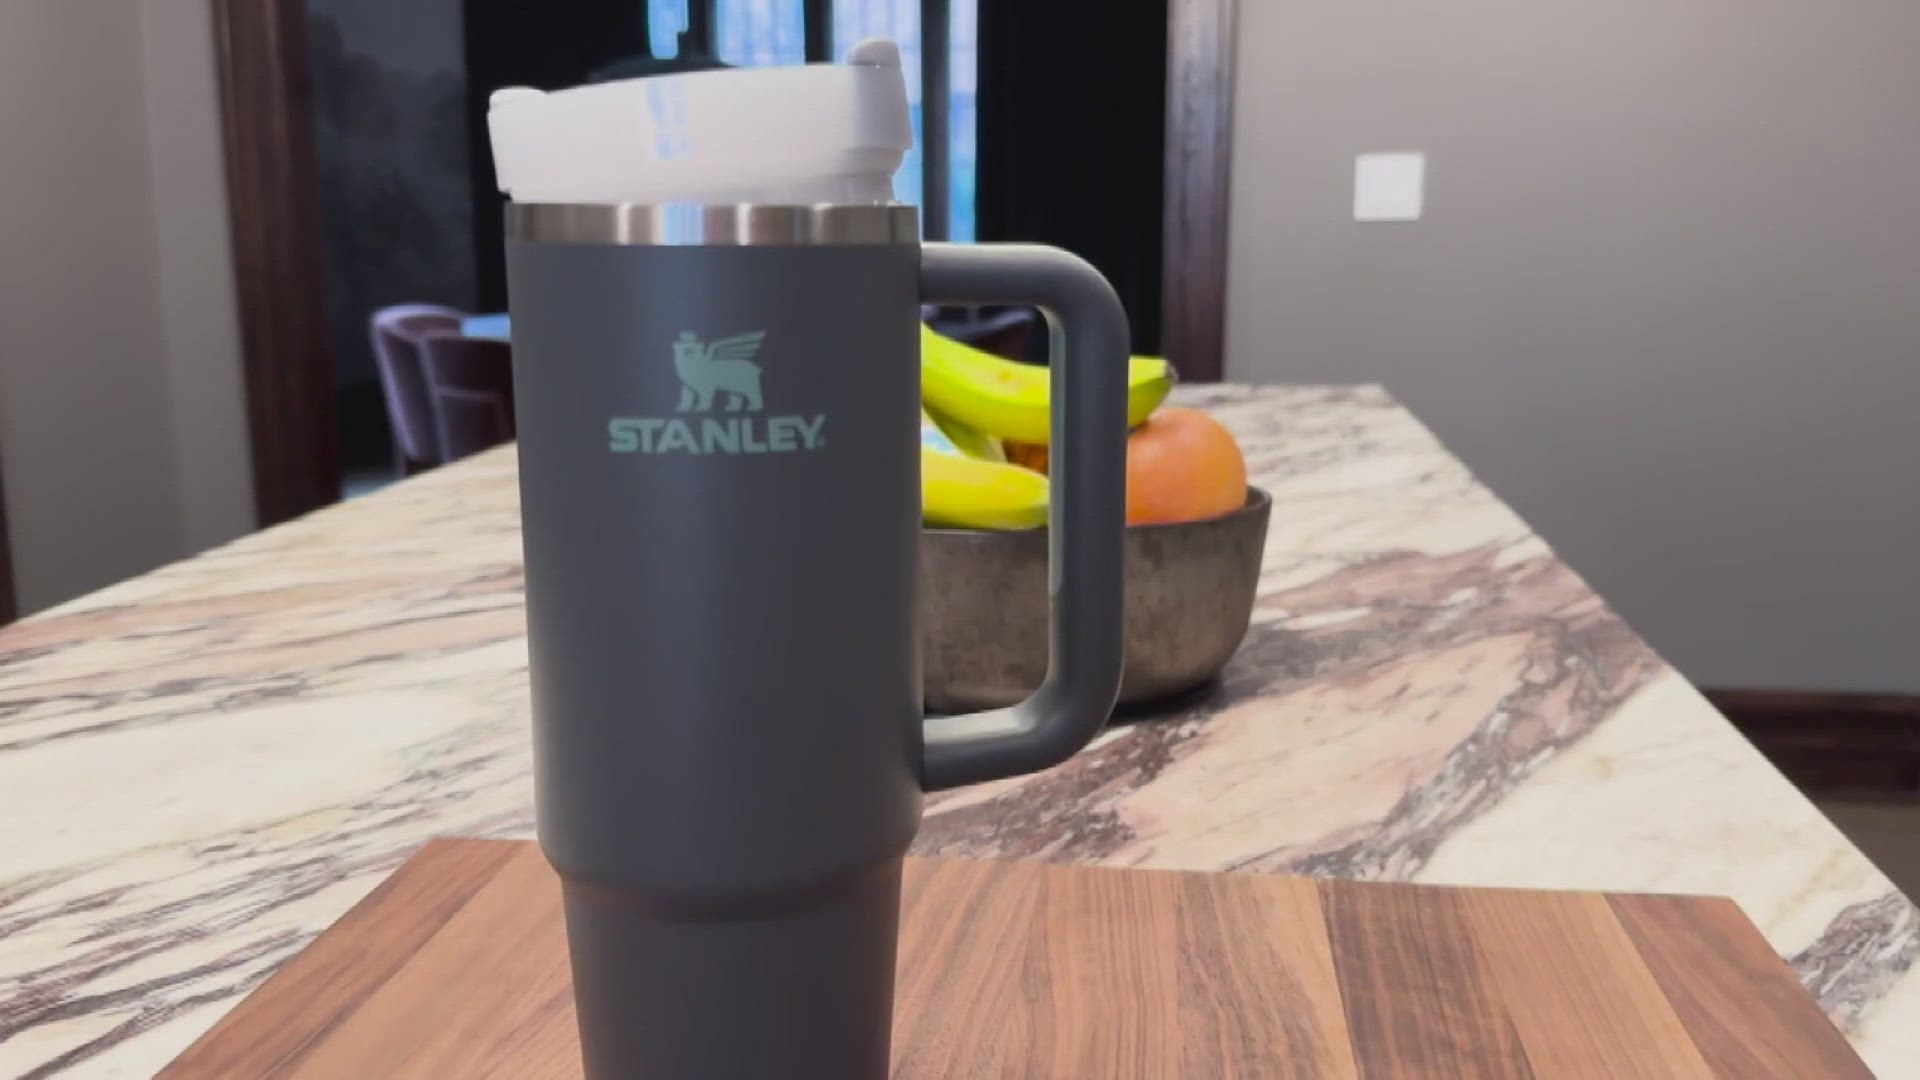 Consumer reports is looking into recent viral posts about possible lead exposure when drinking from Stanley tumblers.